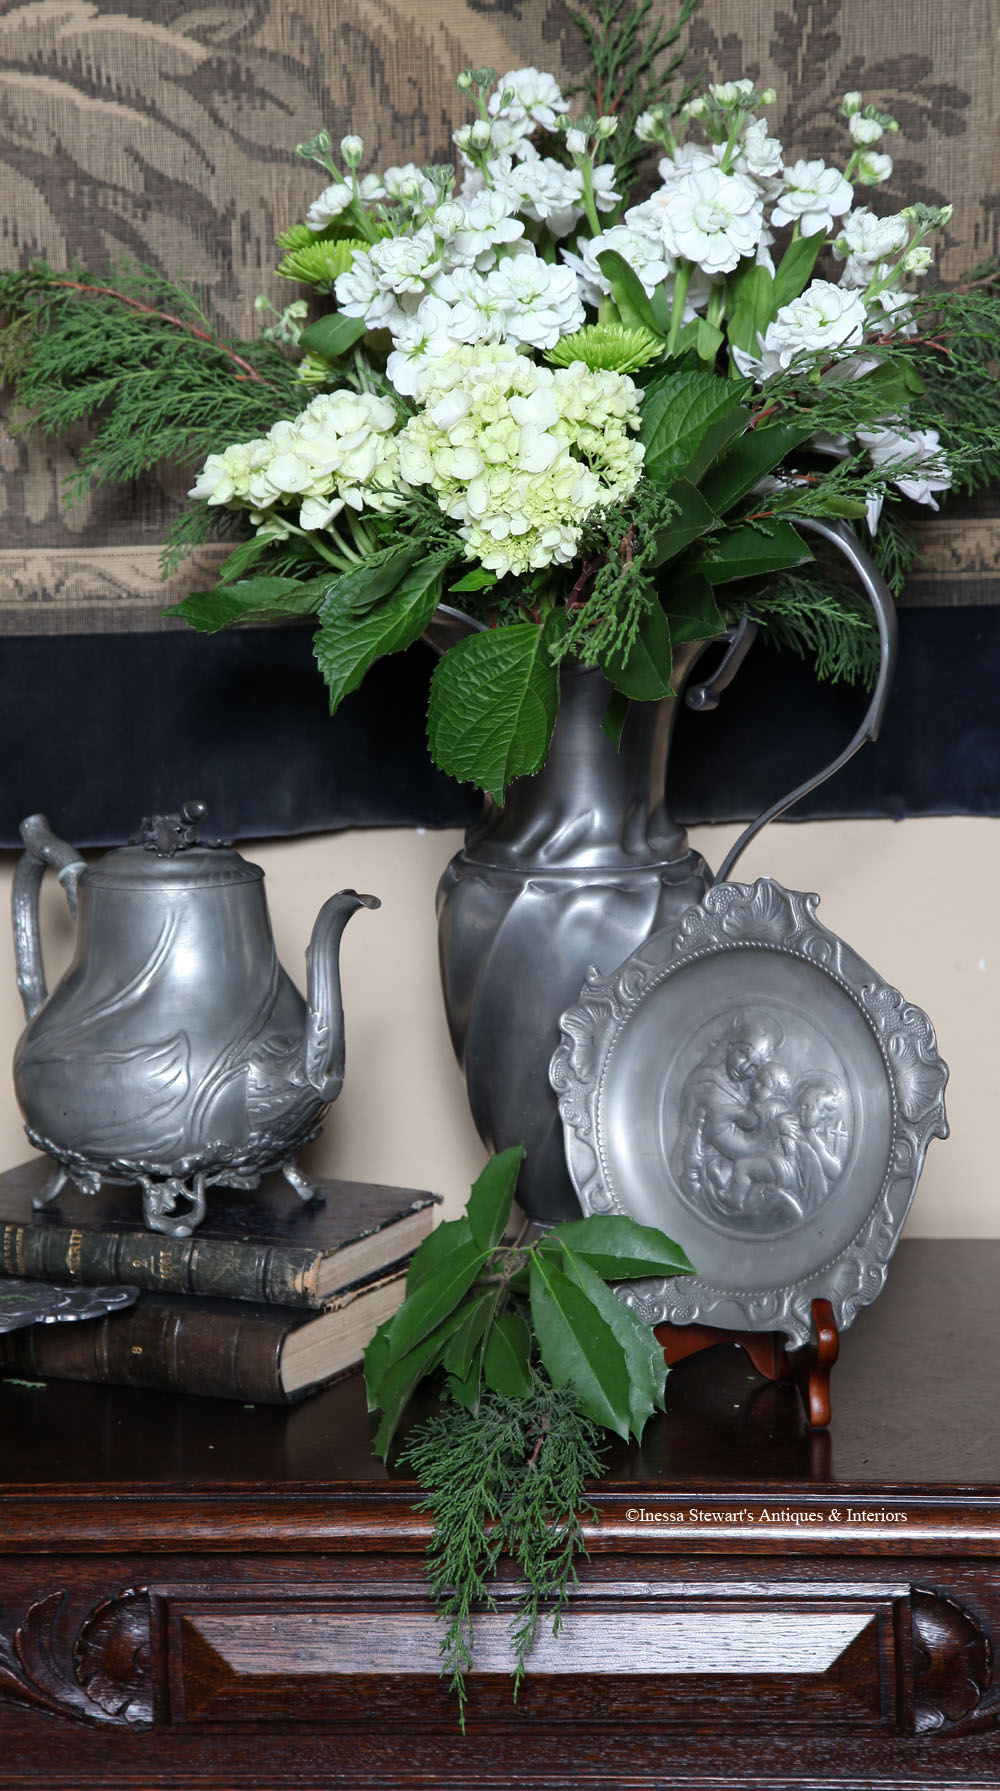 Antique pewter, accessories, flowers closeup at Inessa Stewart's Antiques